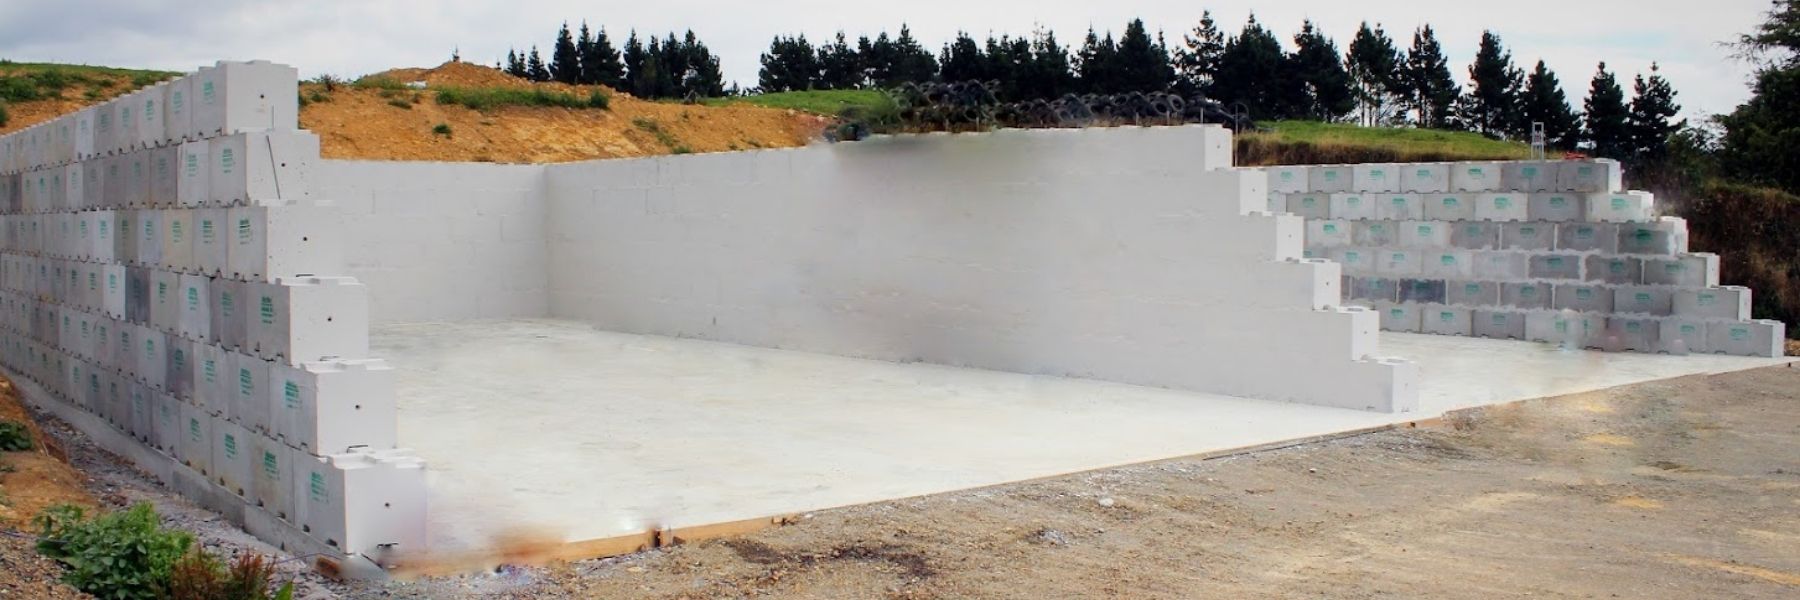 Interbloc Silage Bunker with 2 Bays